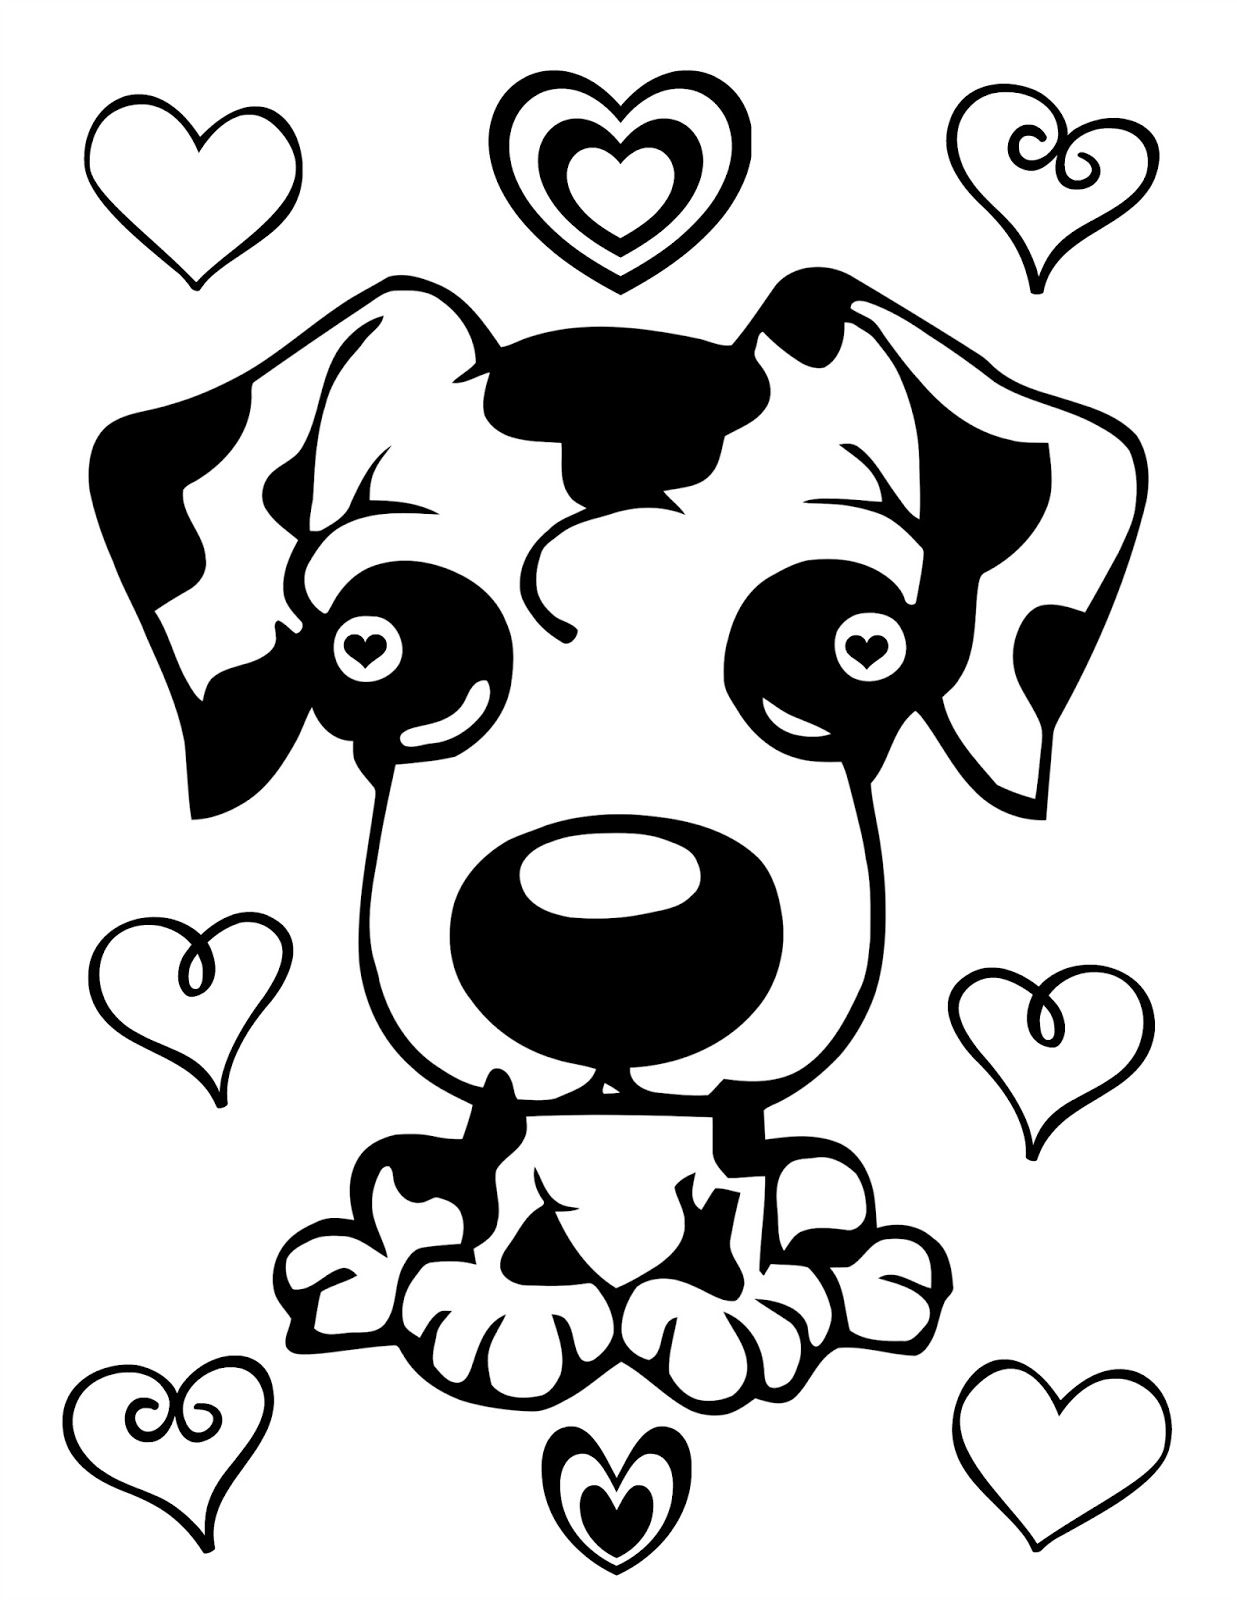 Cjo photo valentines day coloring page cute puppy and hearts